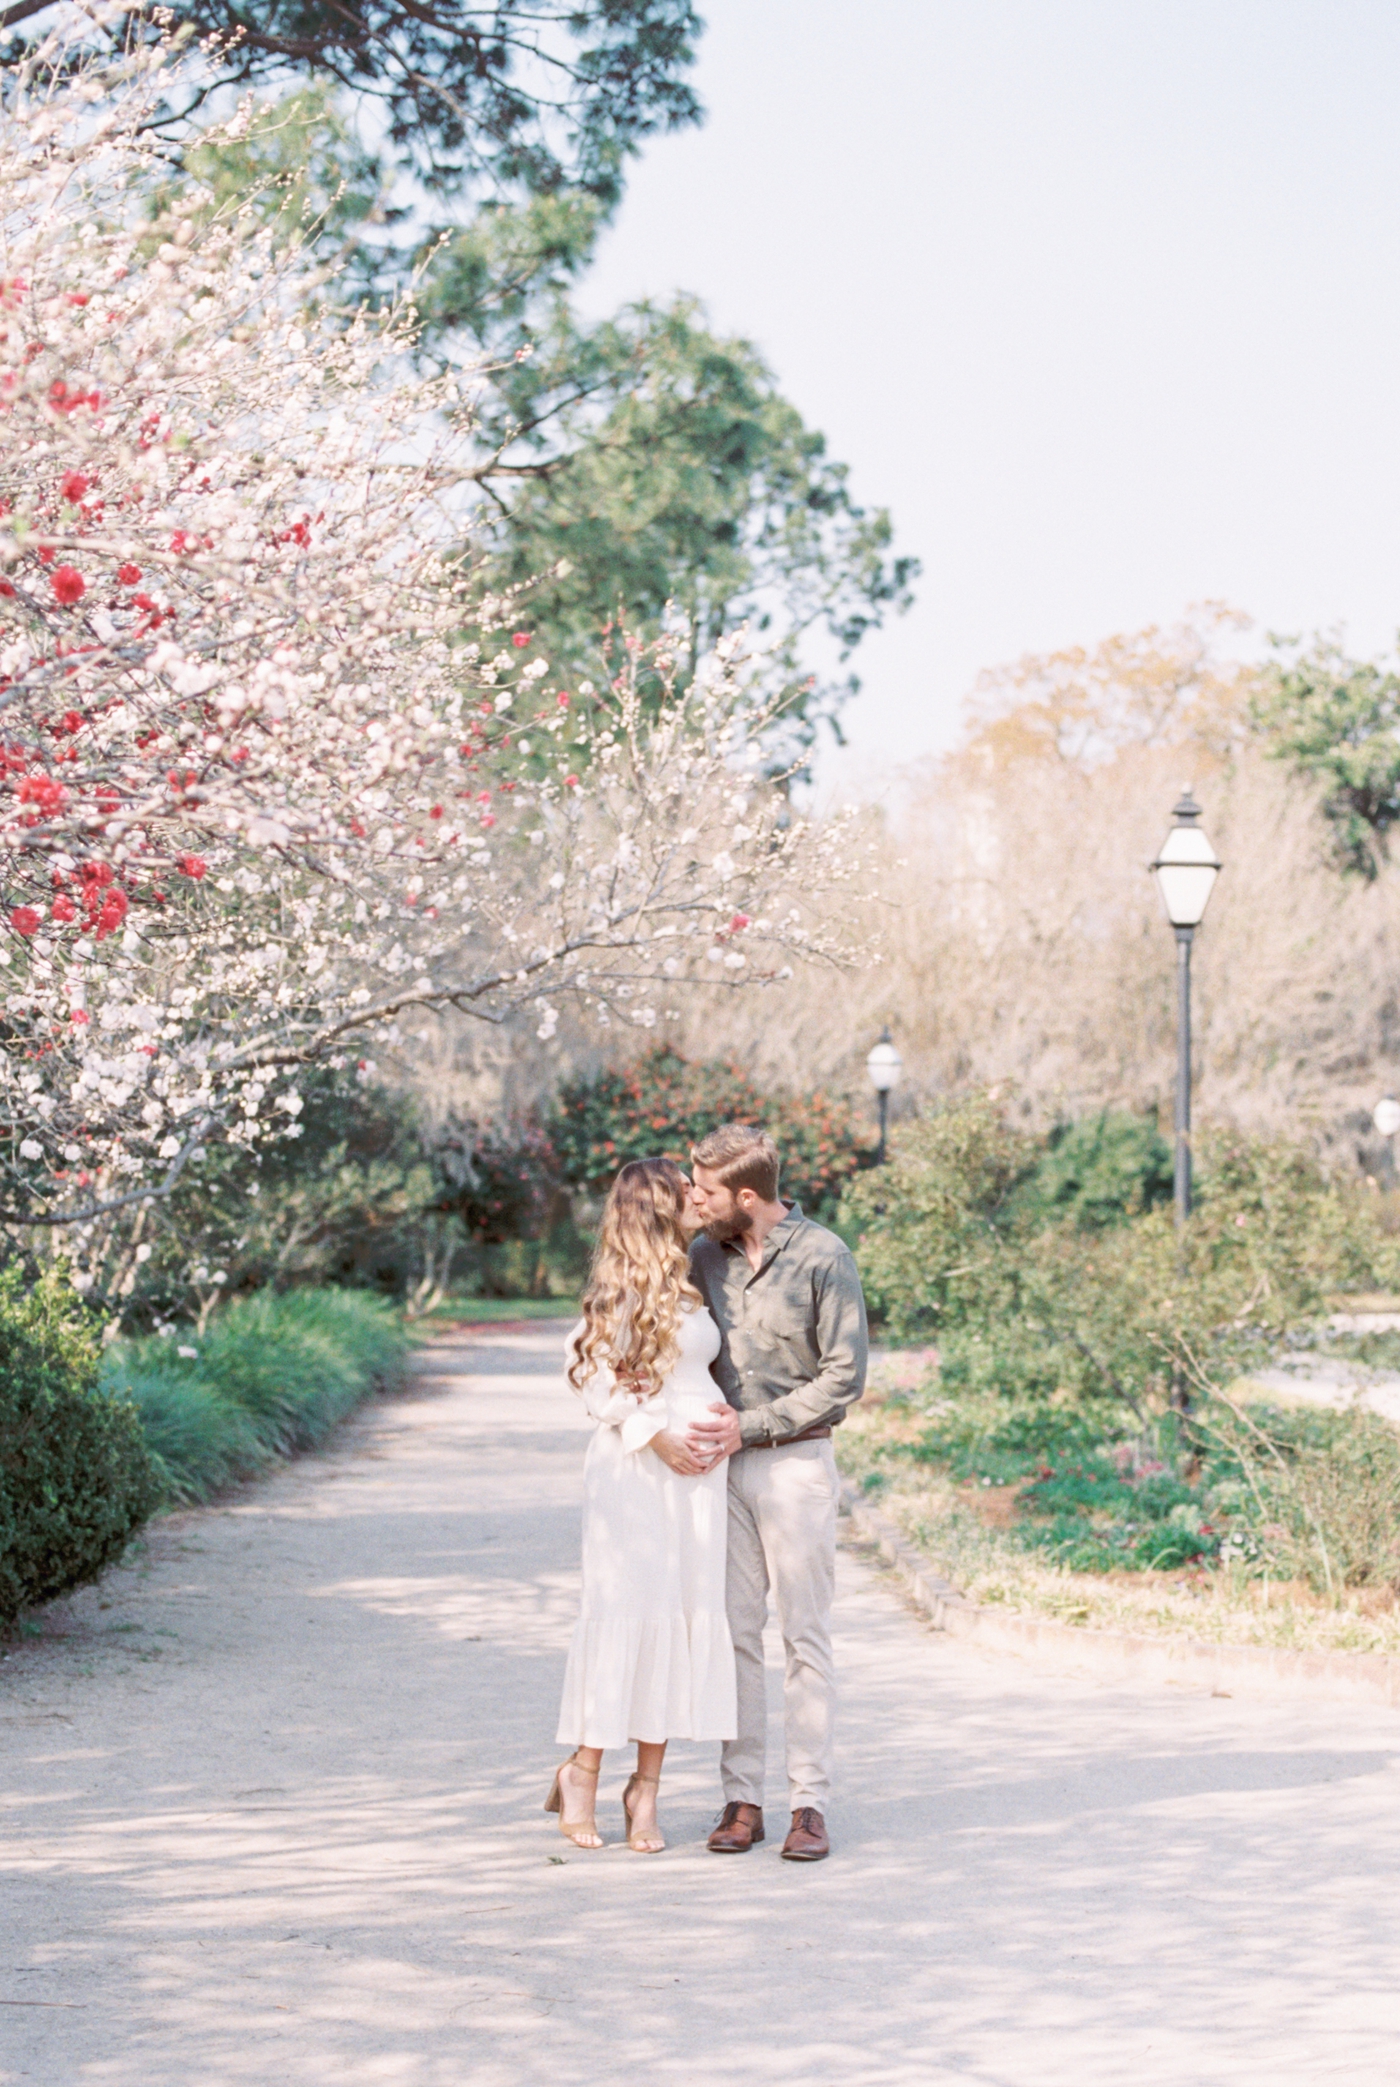 Couple kissing in Charleston SC park during a Spring maternity session. Photo by Caitlyn Motycka Photography.